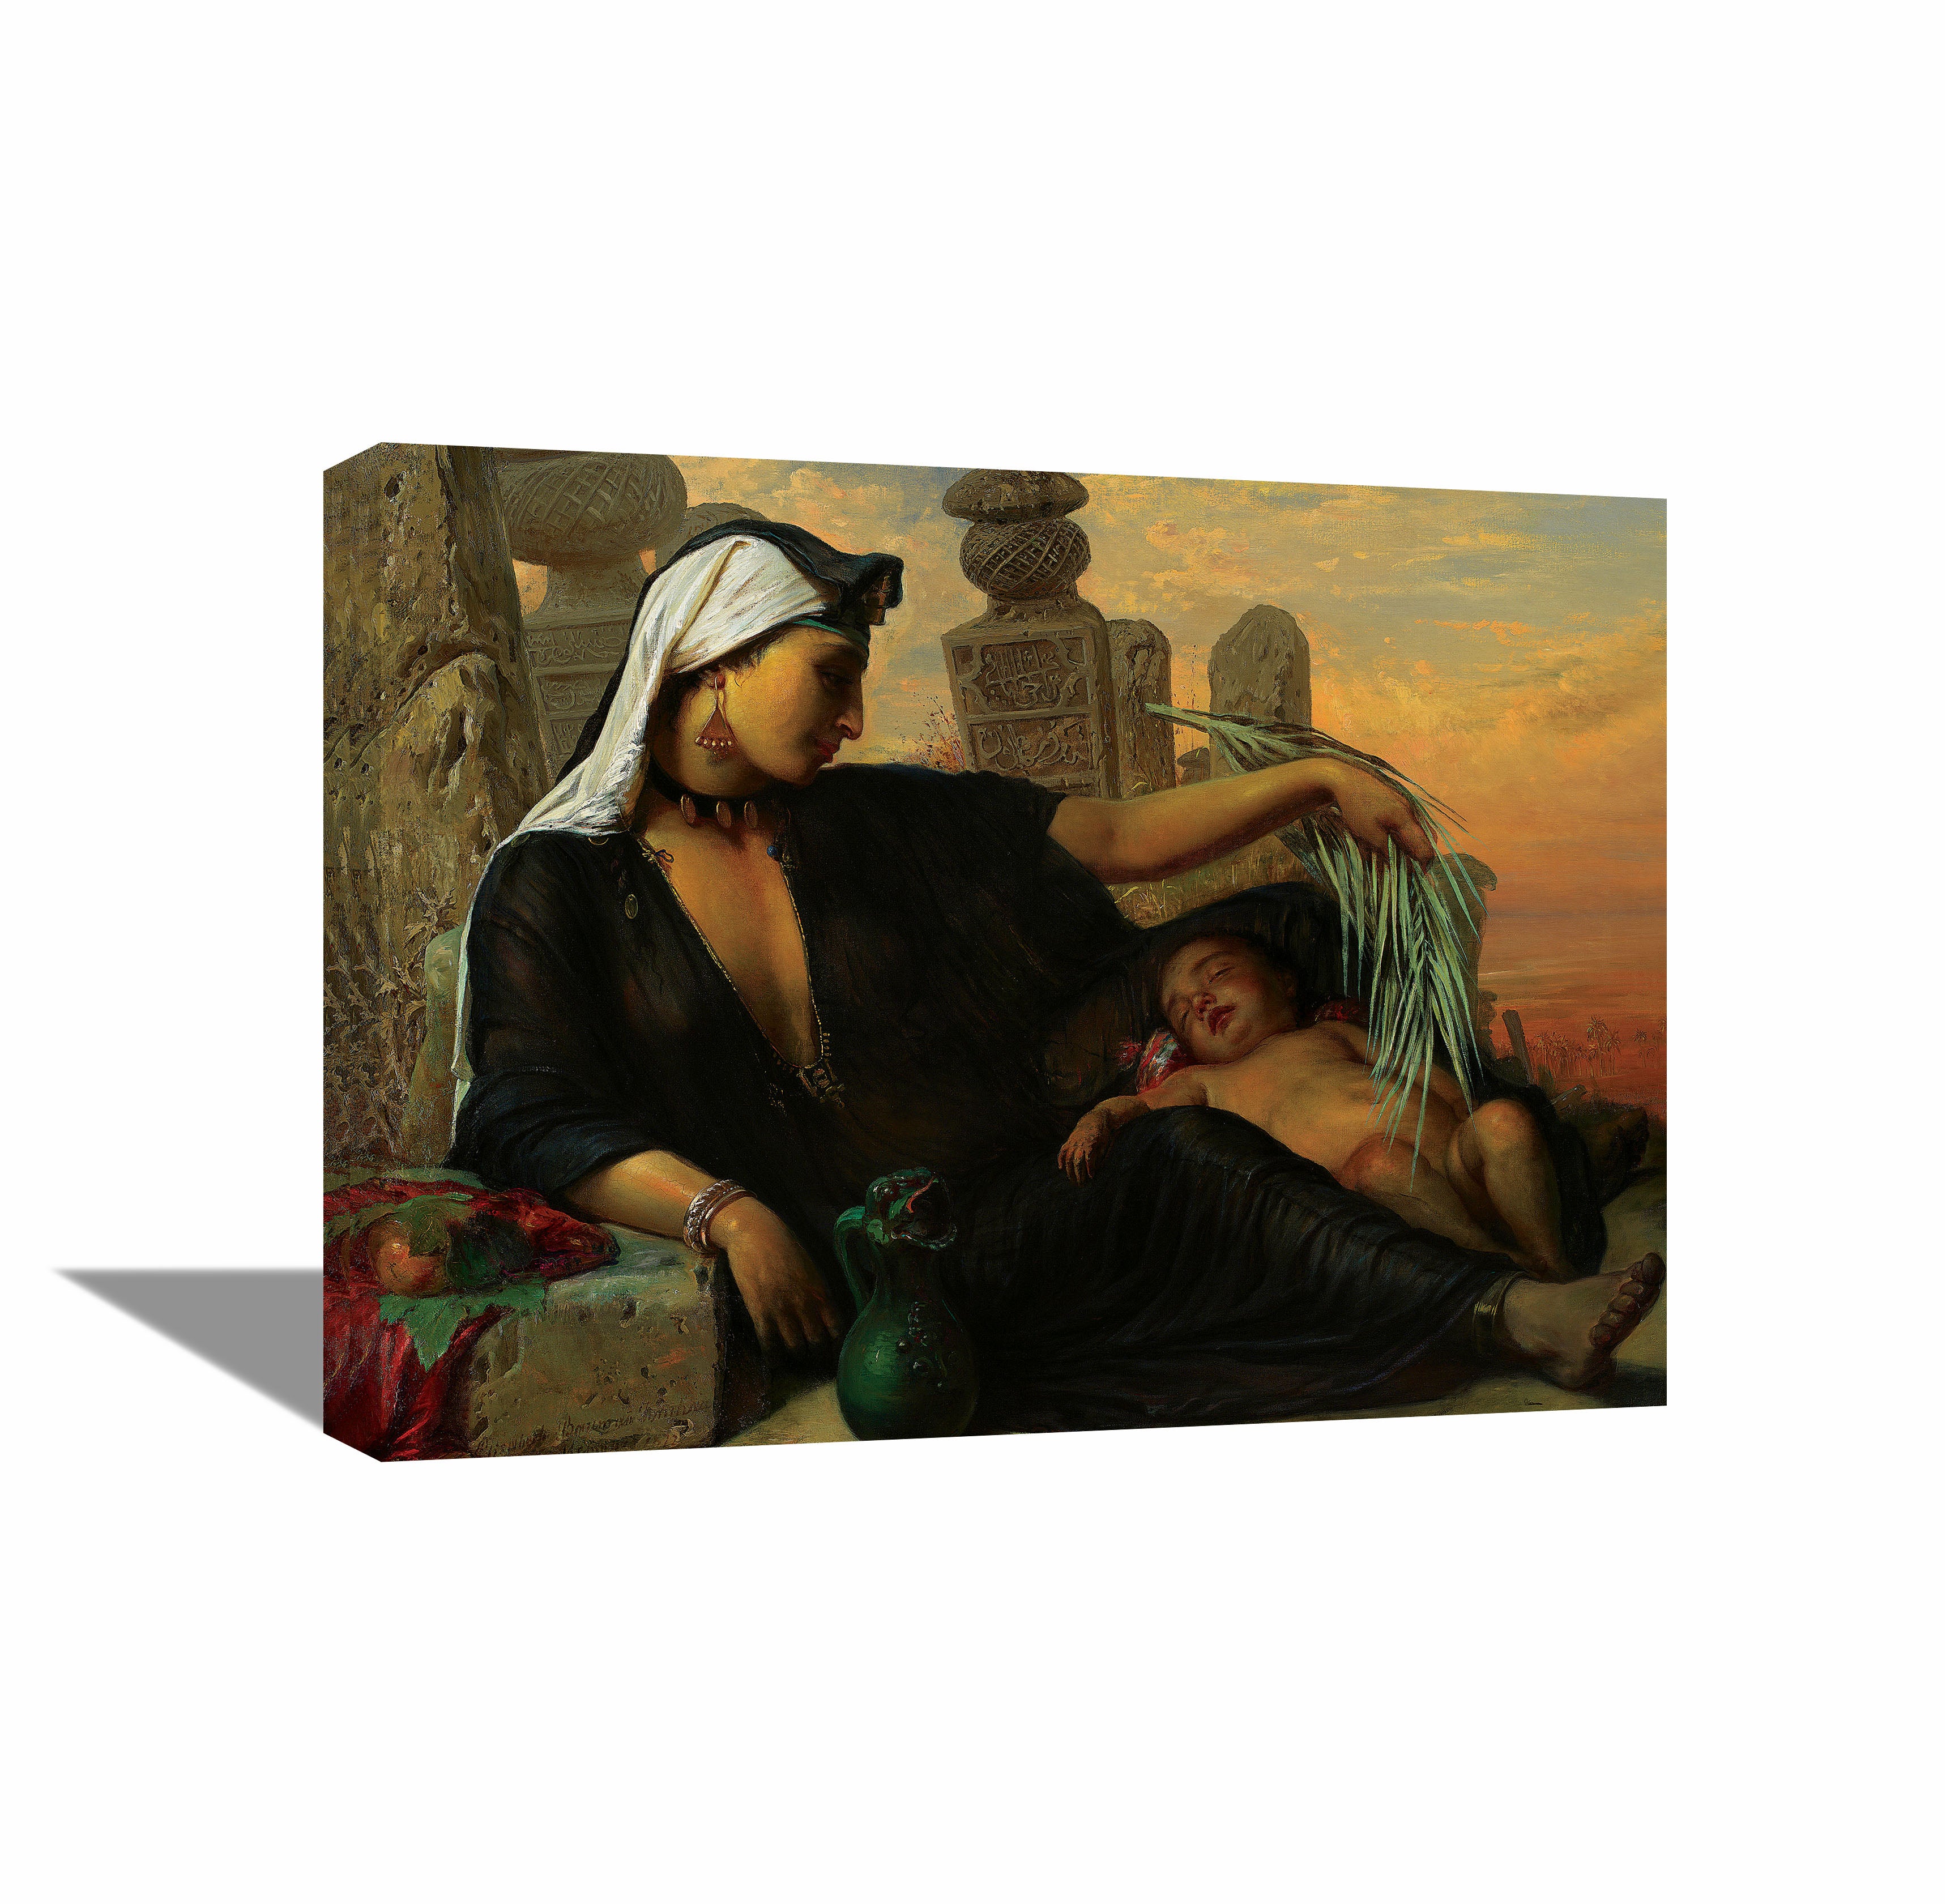 An Egyptian Fellah Woman with her Baby